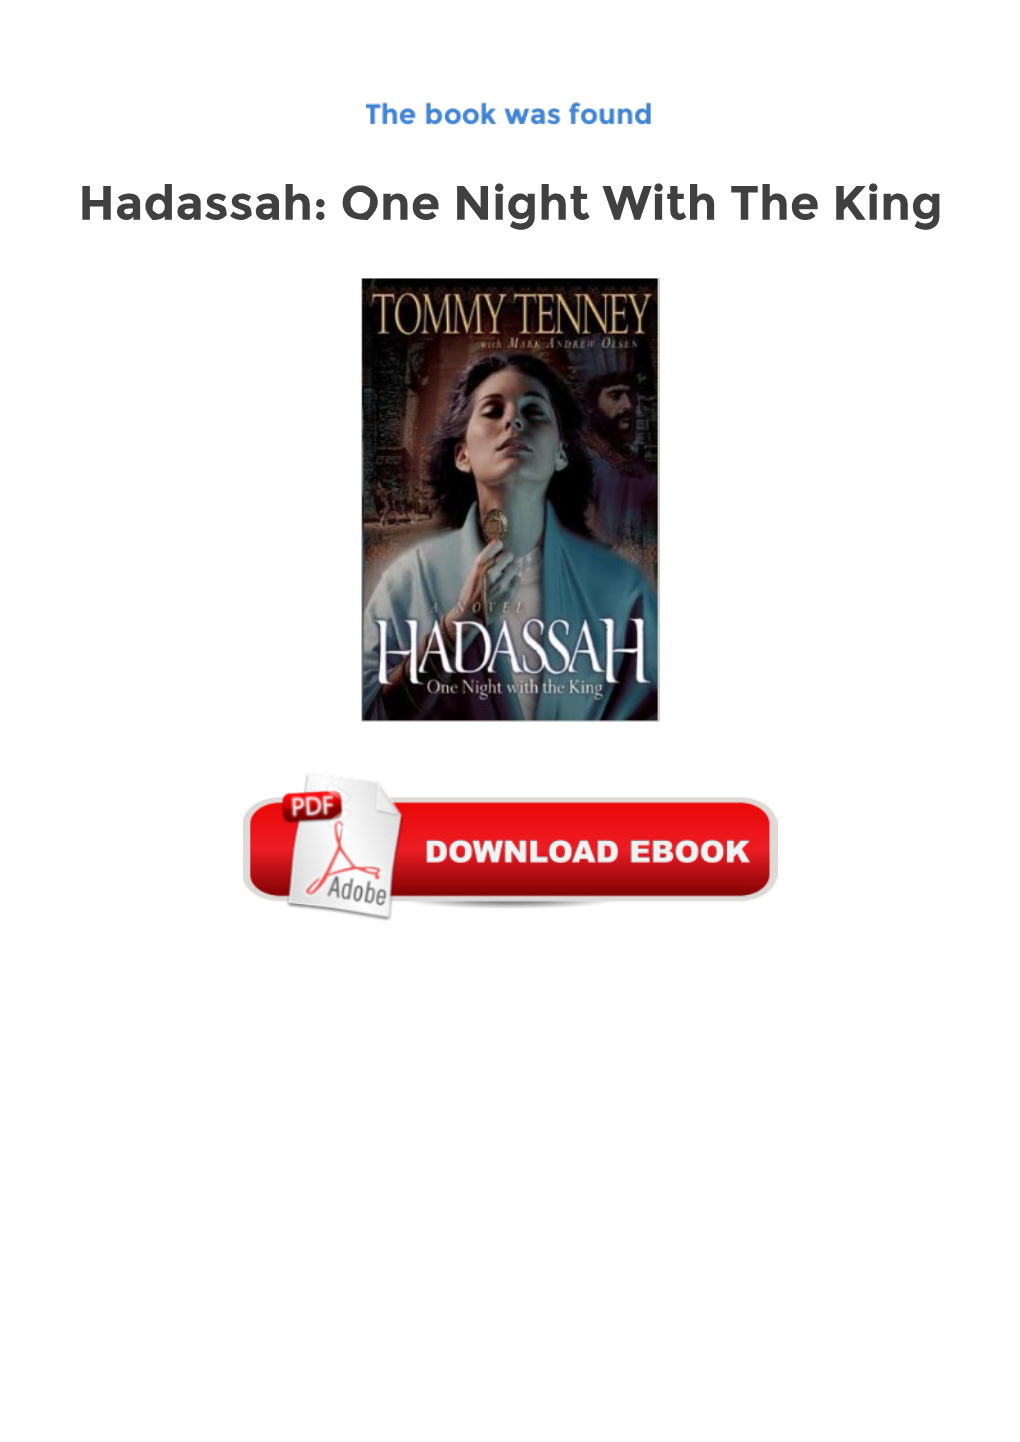 Hadassah: One Night with the King Free Ebooks PDF Bestselling Author Tommy Tenney Expands the Extraordinary Story of Esther Like No Novelist Has Done Before